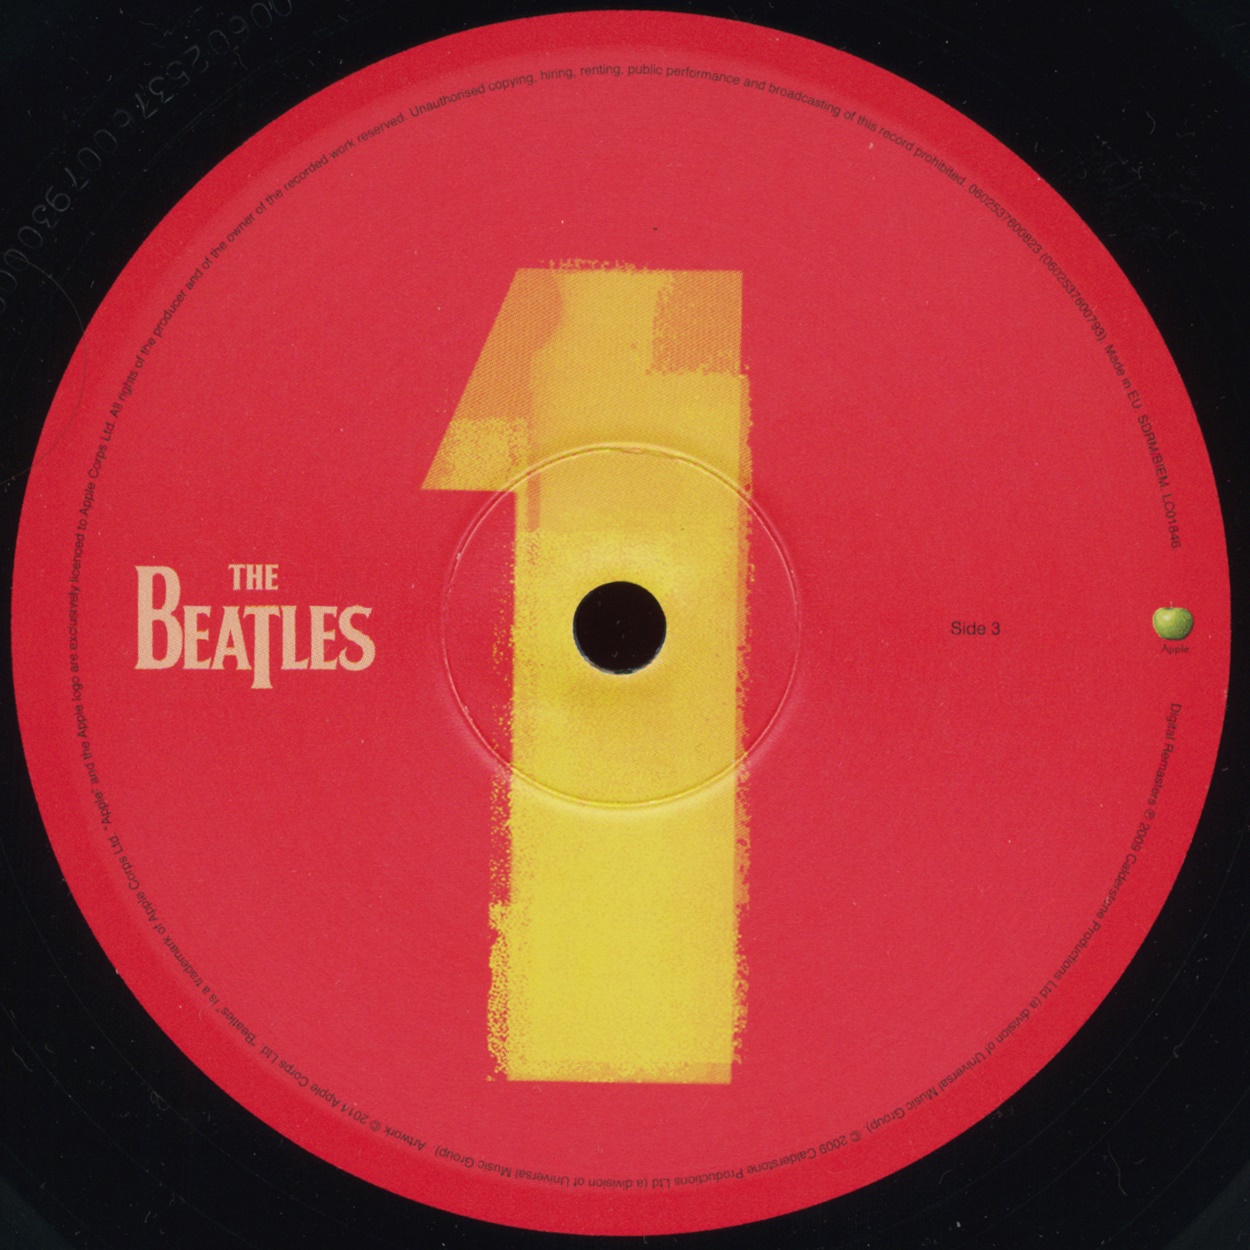 The Beatles Collection » The Beatles 1, Apple 1 1.